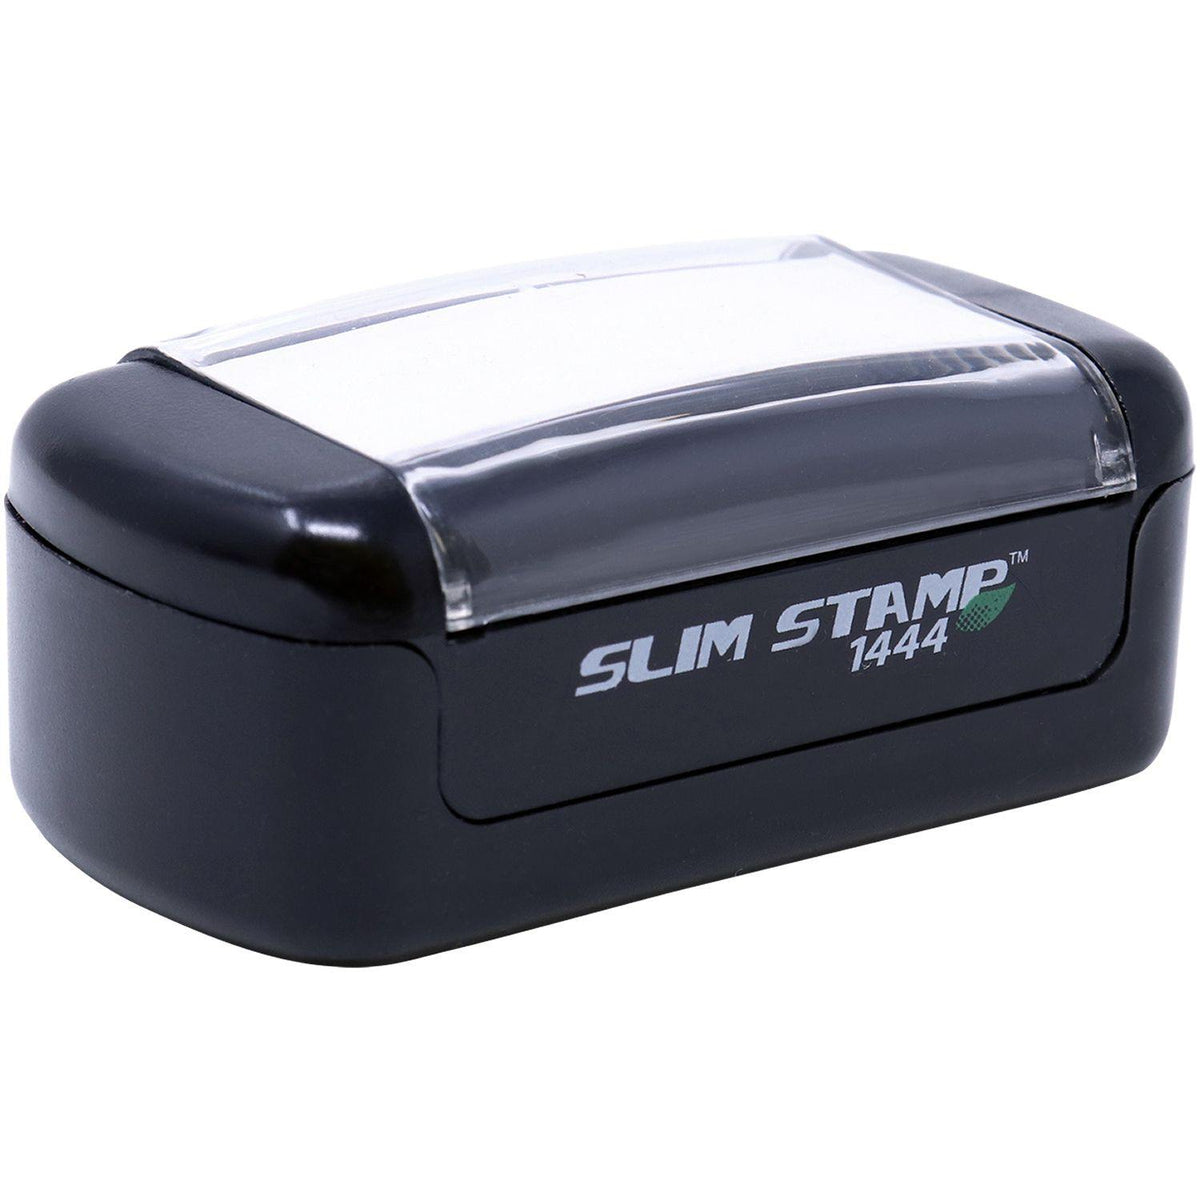 Alt View of Slim Pre-Inked Facturado Stamp Mount Angle